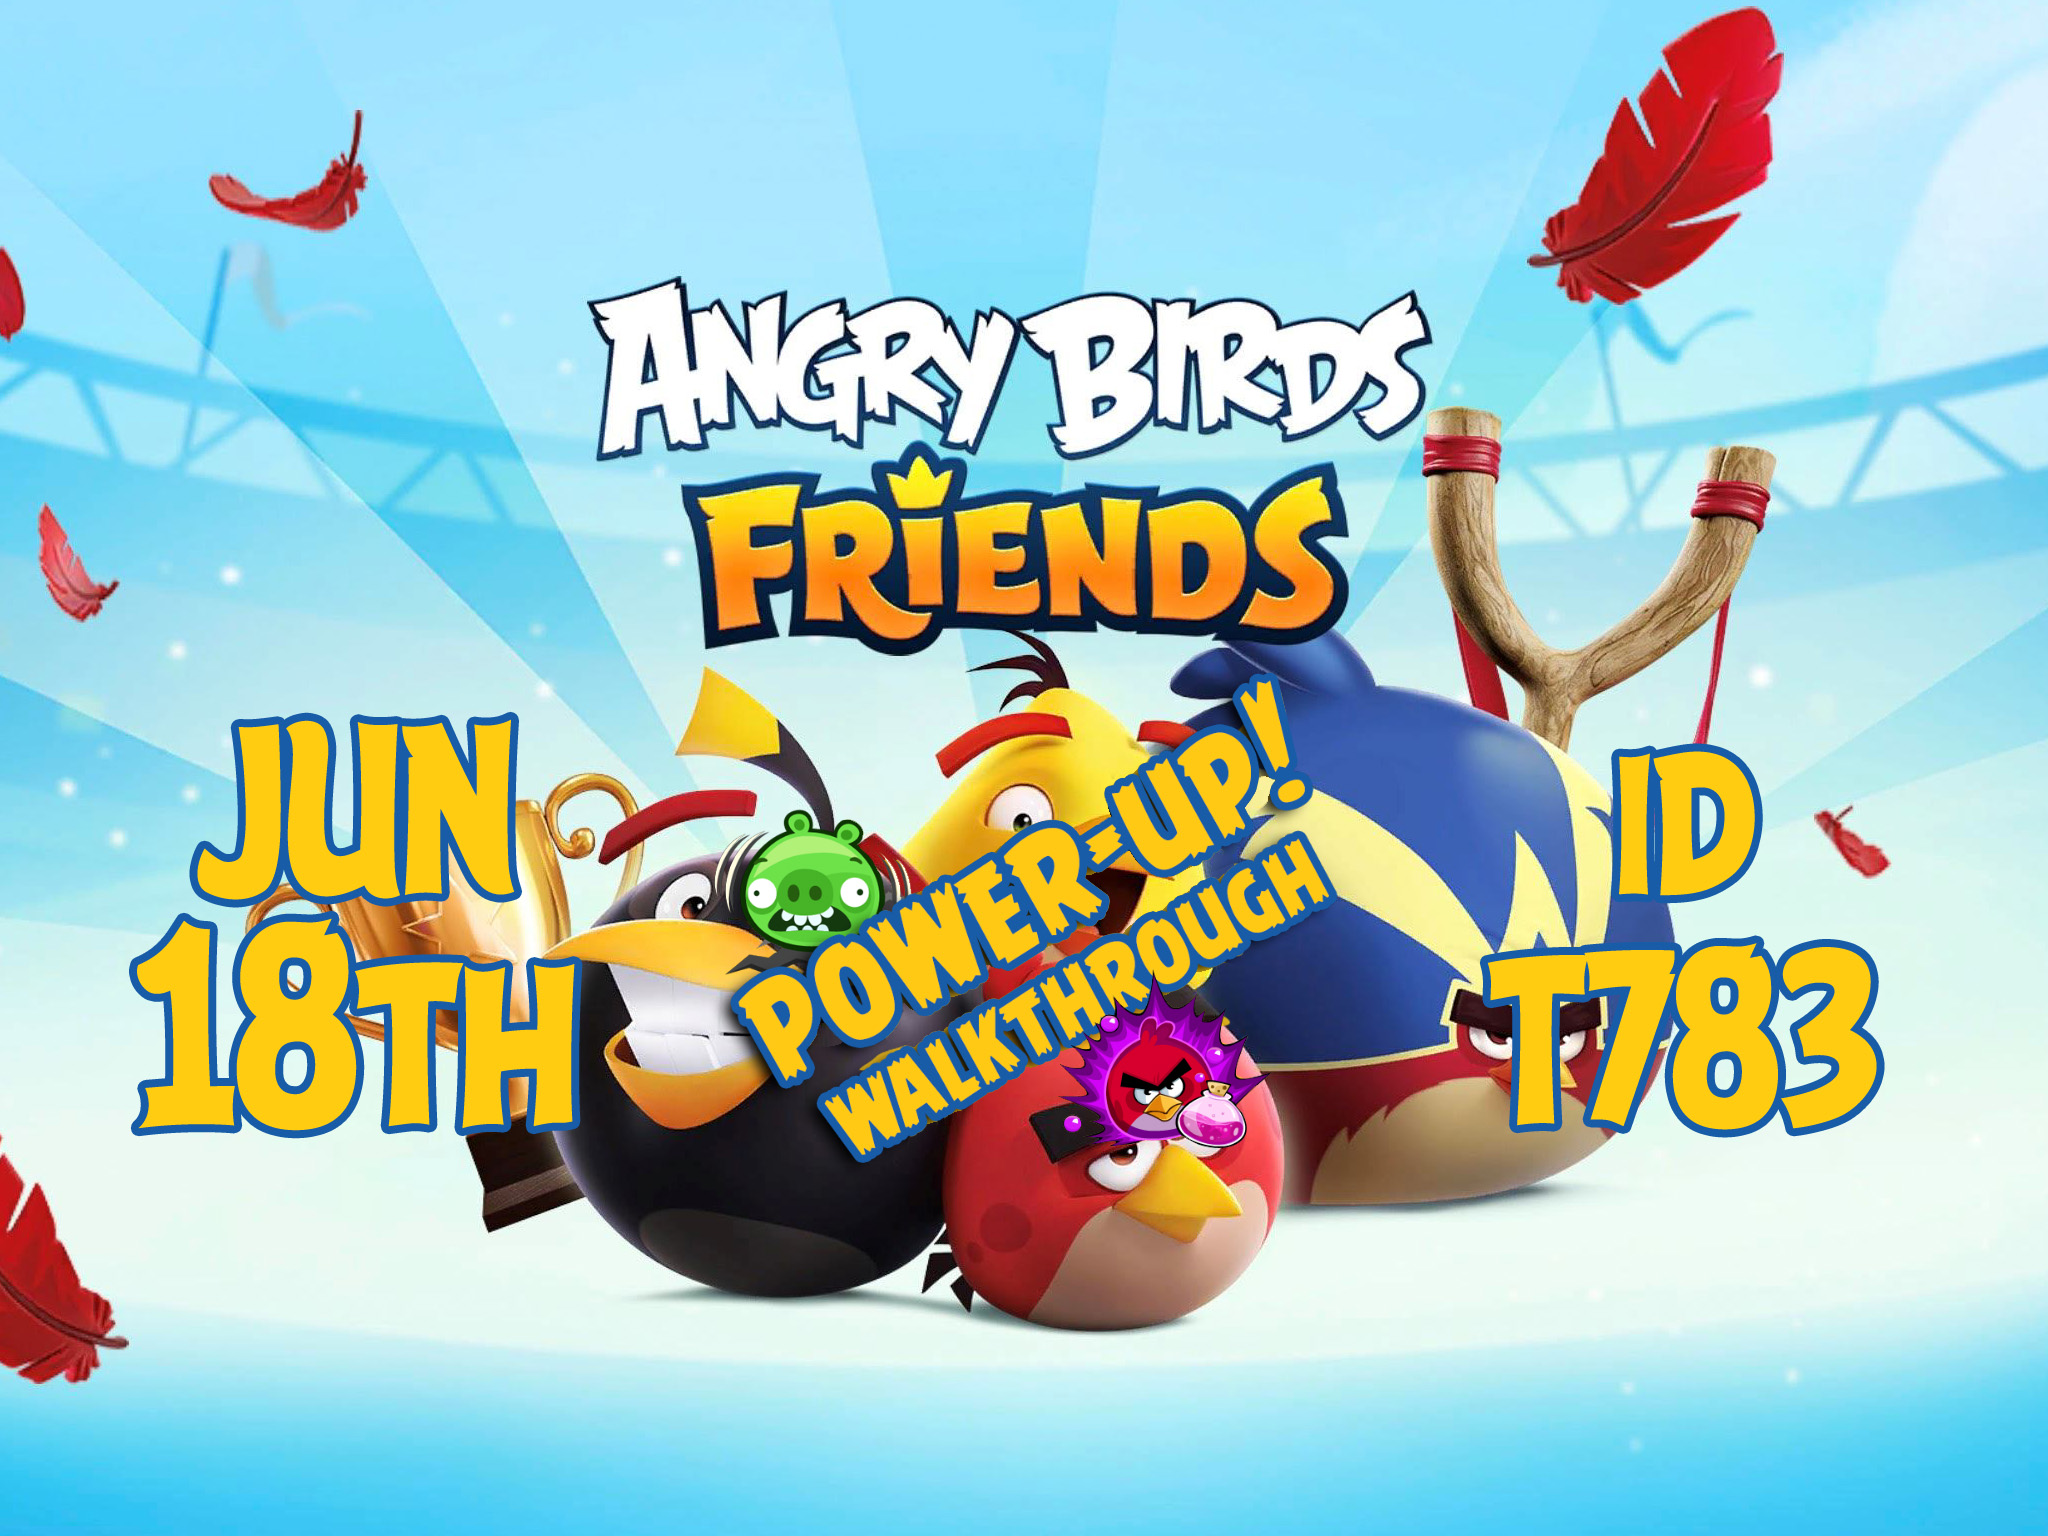 Angry-Birds-Friends-Tournament-T783-Feature-Image-PU